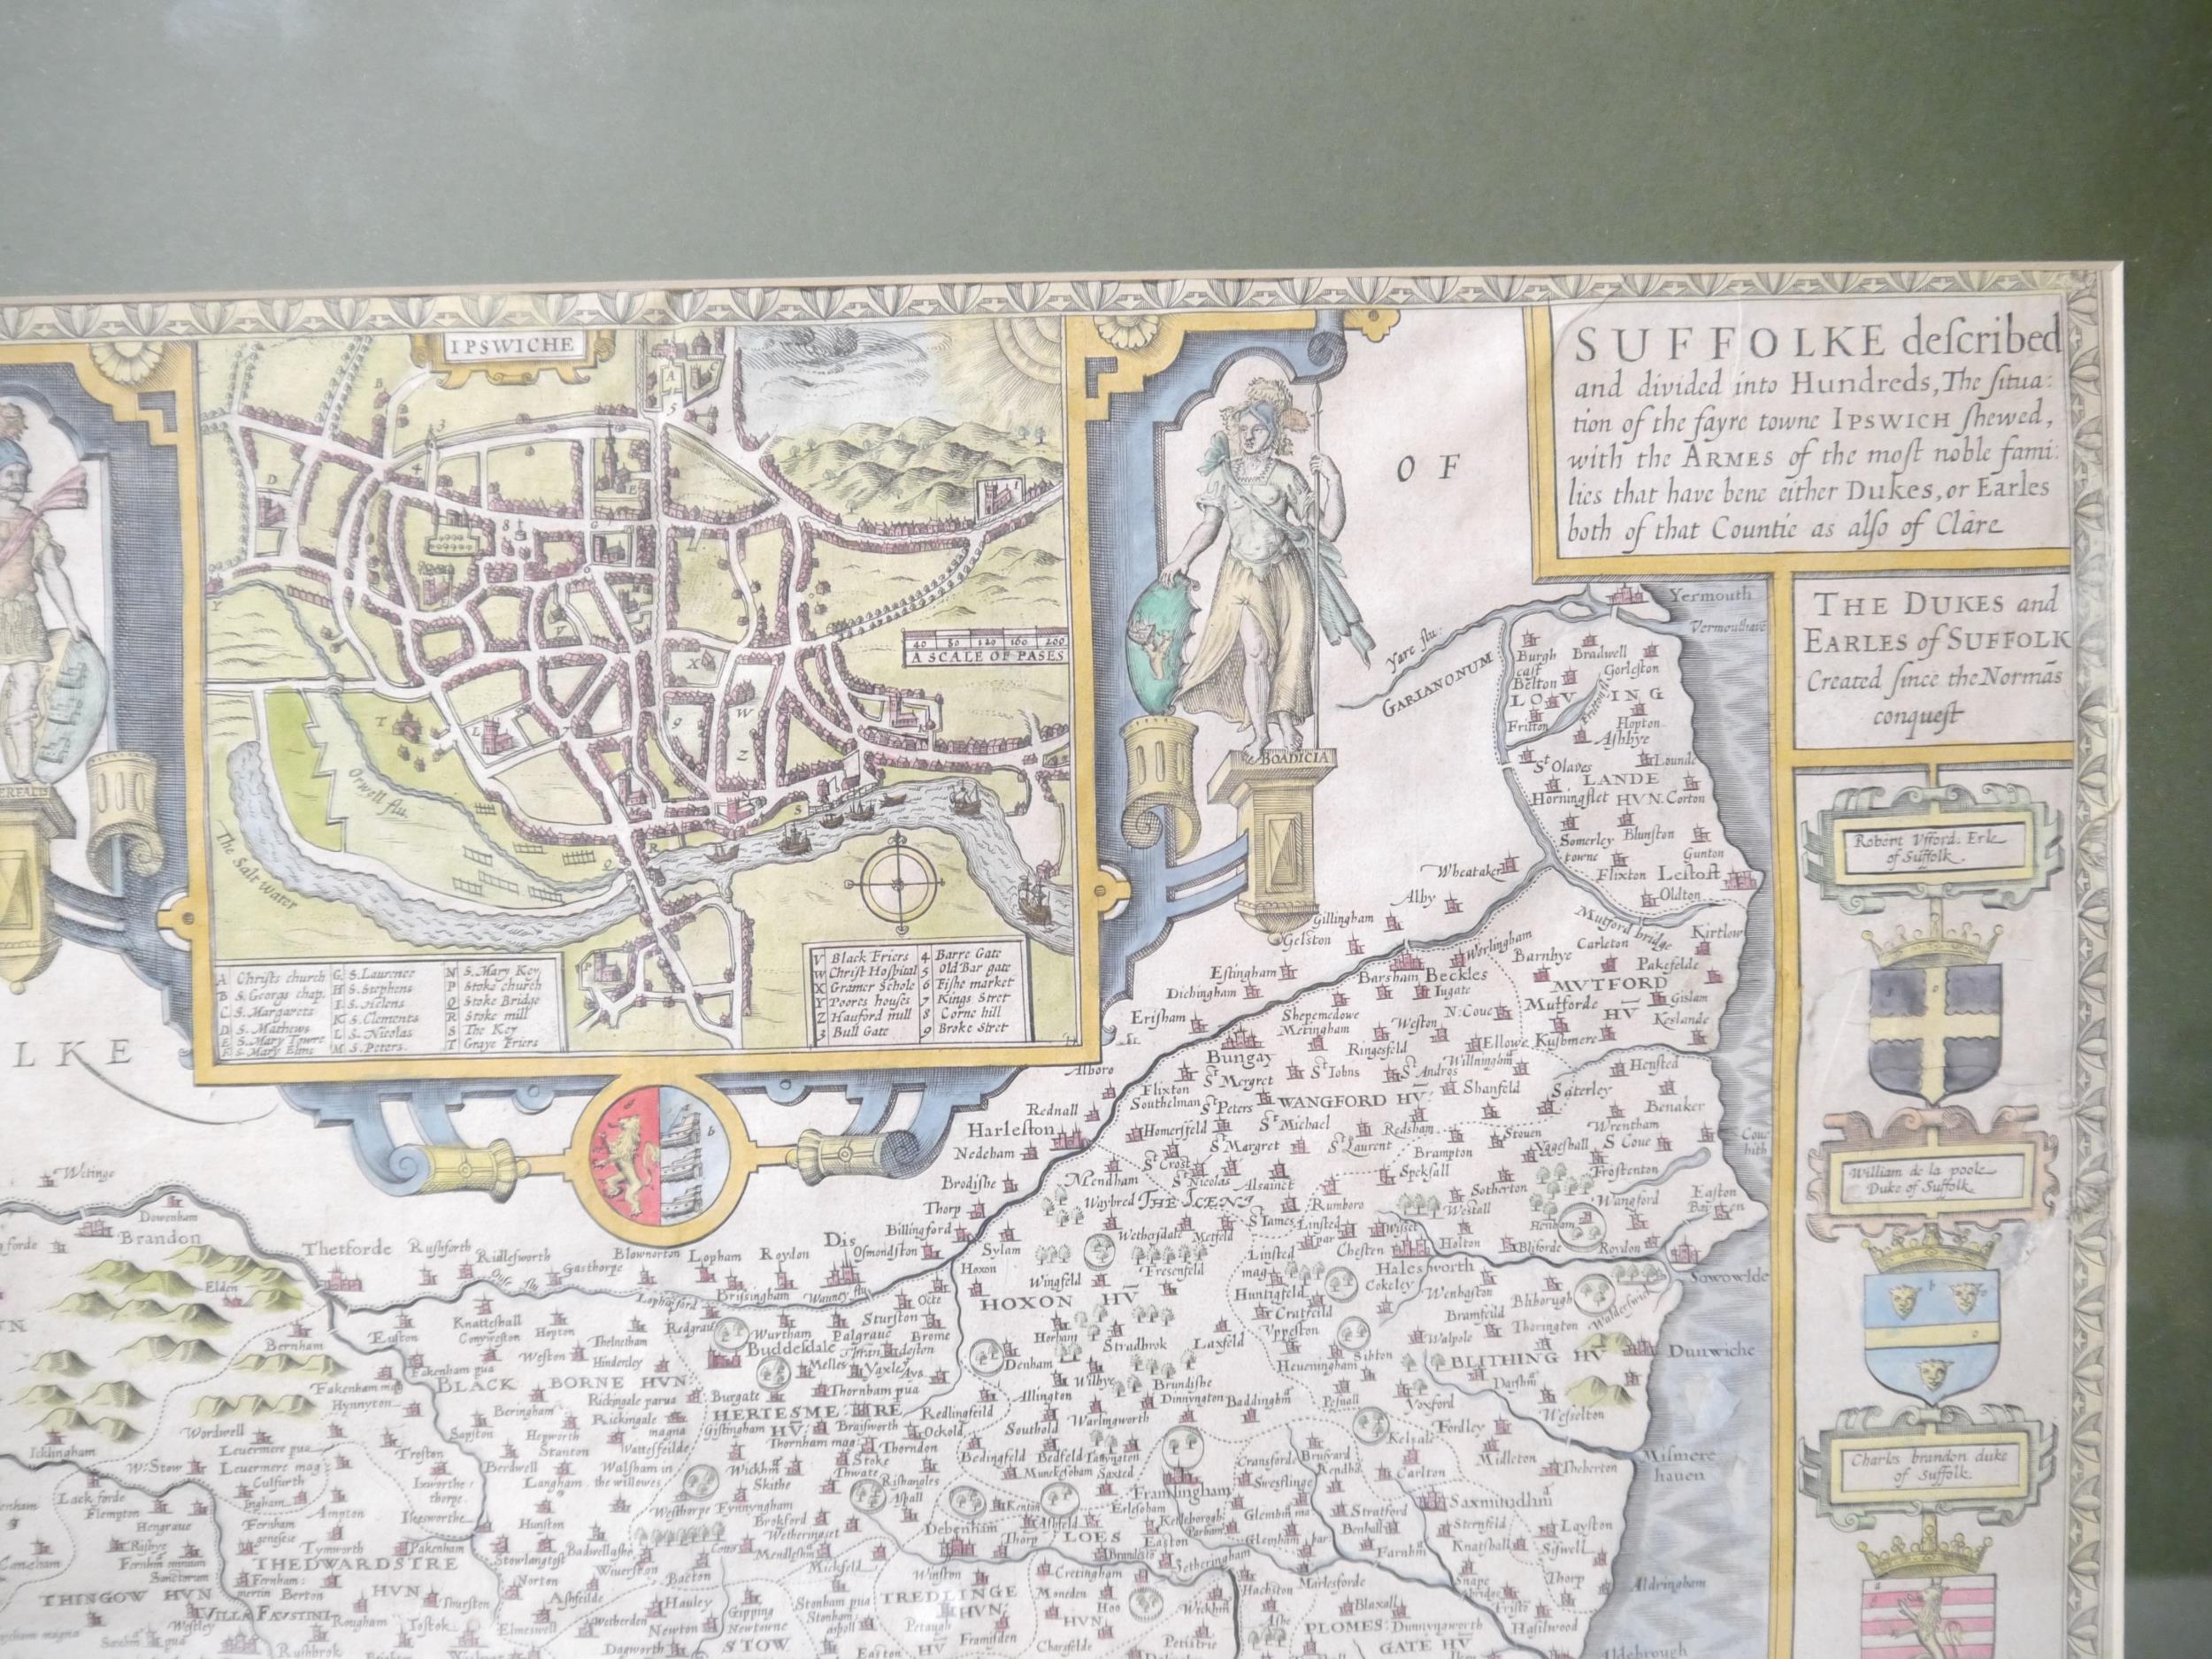 (Suffolk), John Speed: 'Suffolke described and divided into Hundreds', engraved hand coloured map, - Image 5 of 5